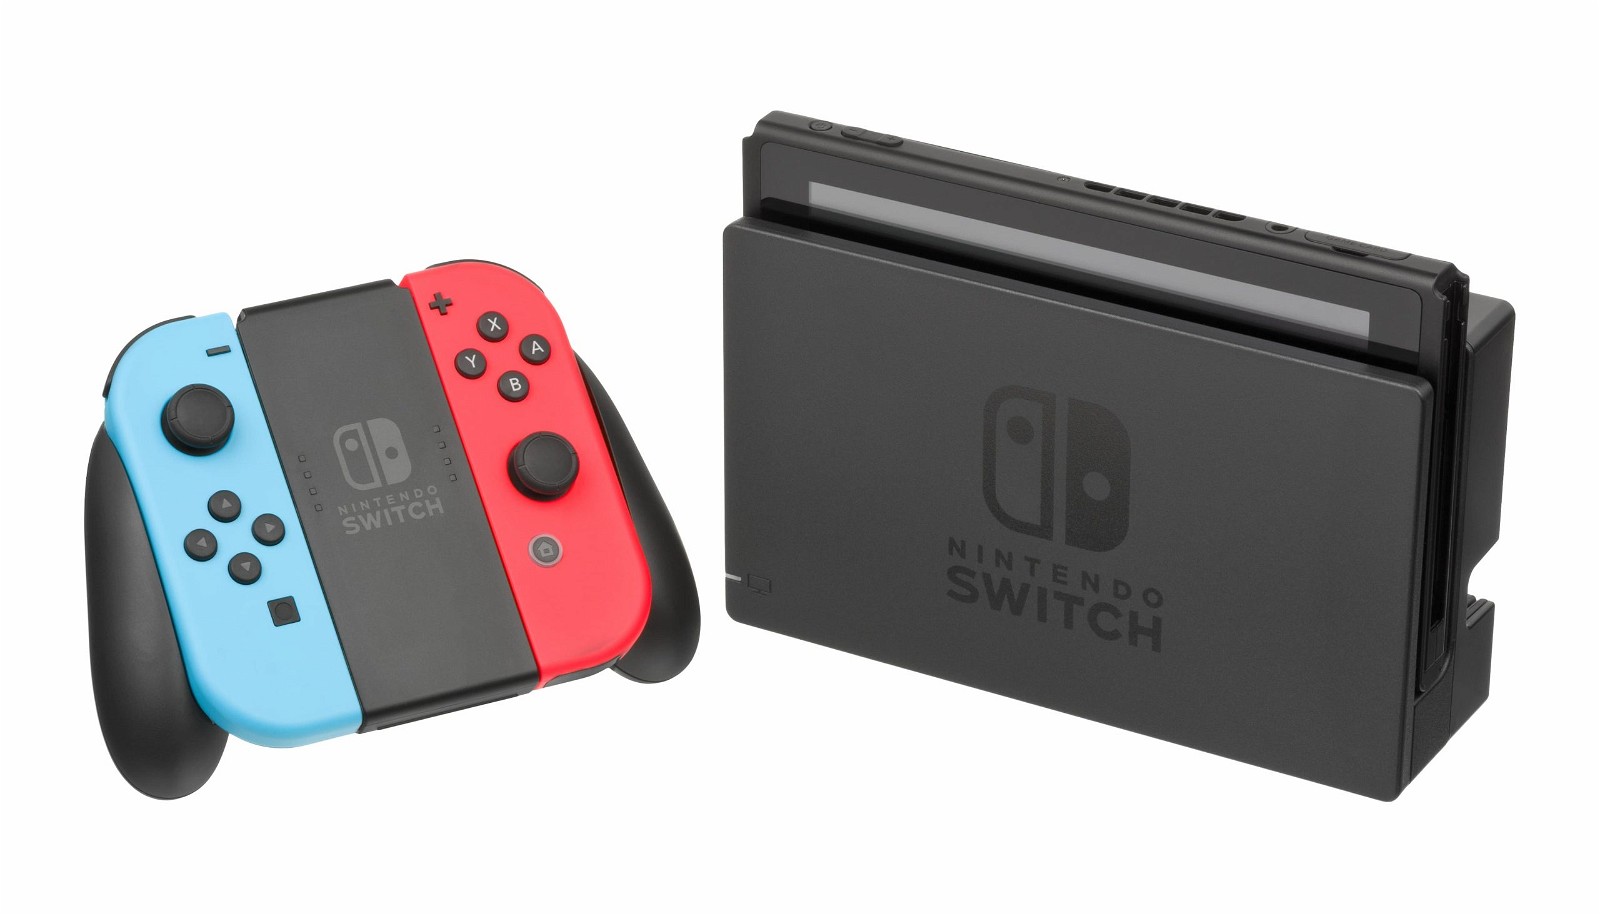 Nintendo Switch 2 by 2024 as perspicacious analyst forecasts potential  next-generation Nintendo console launch -  News